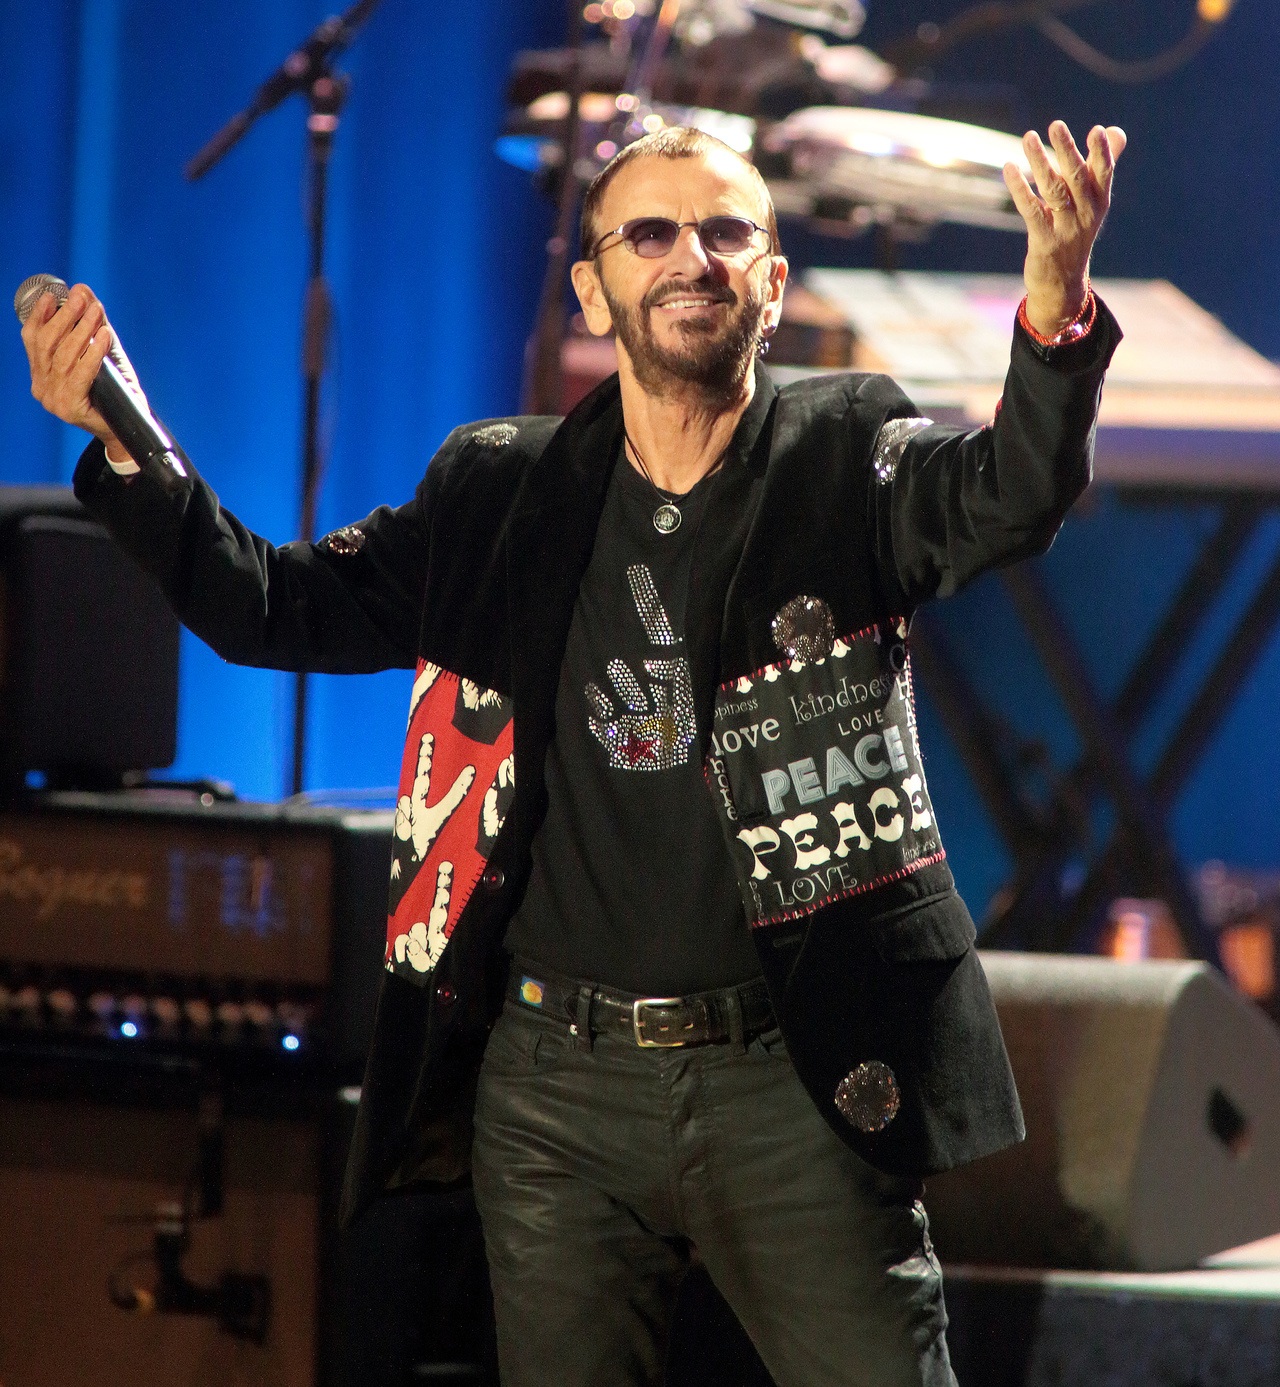 Ringo Starr performs in concert with his All Starr Band in Baltimore in 2015.